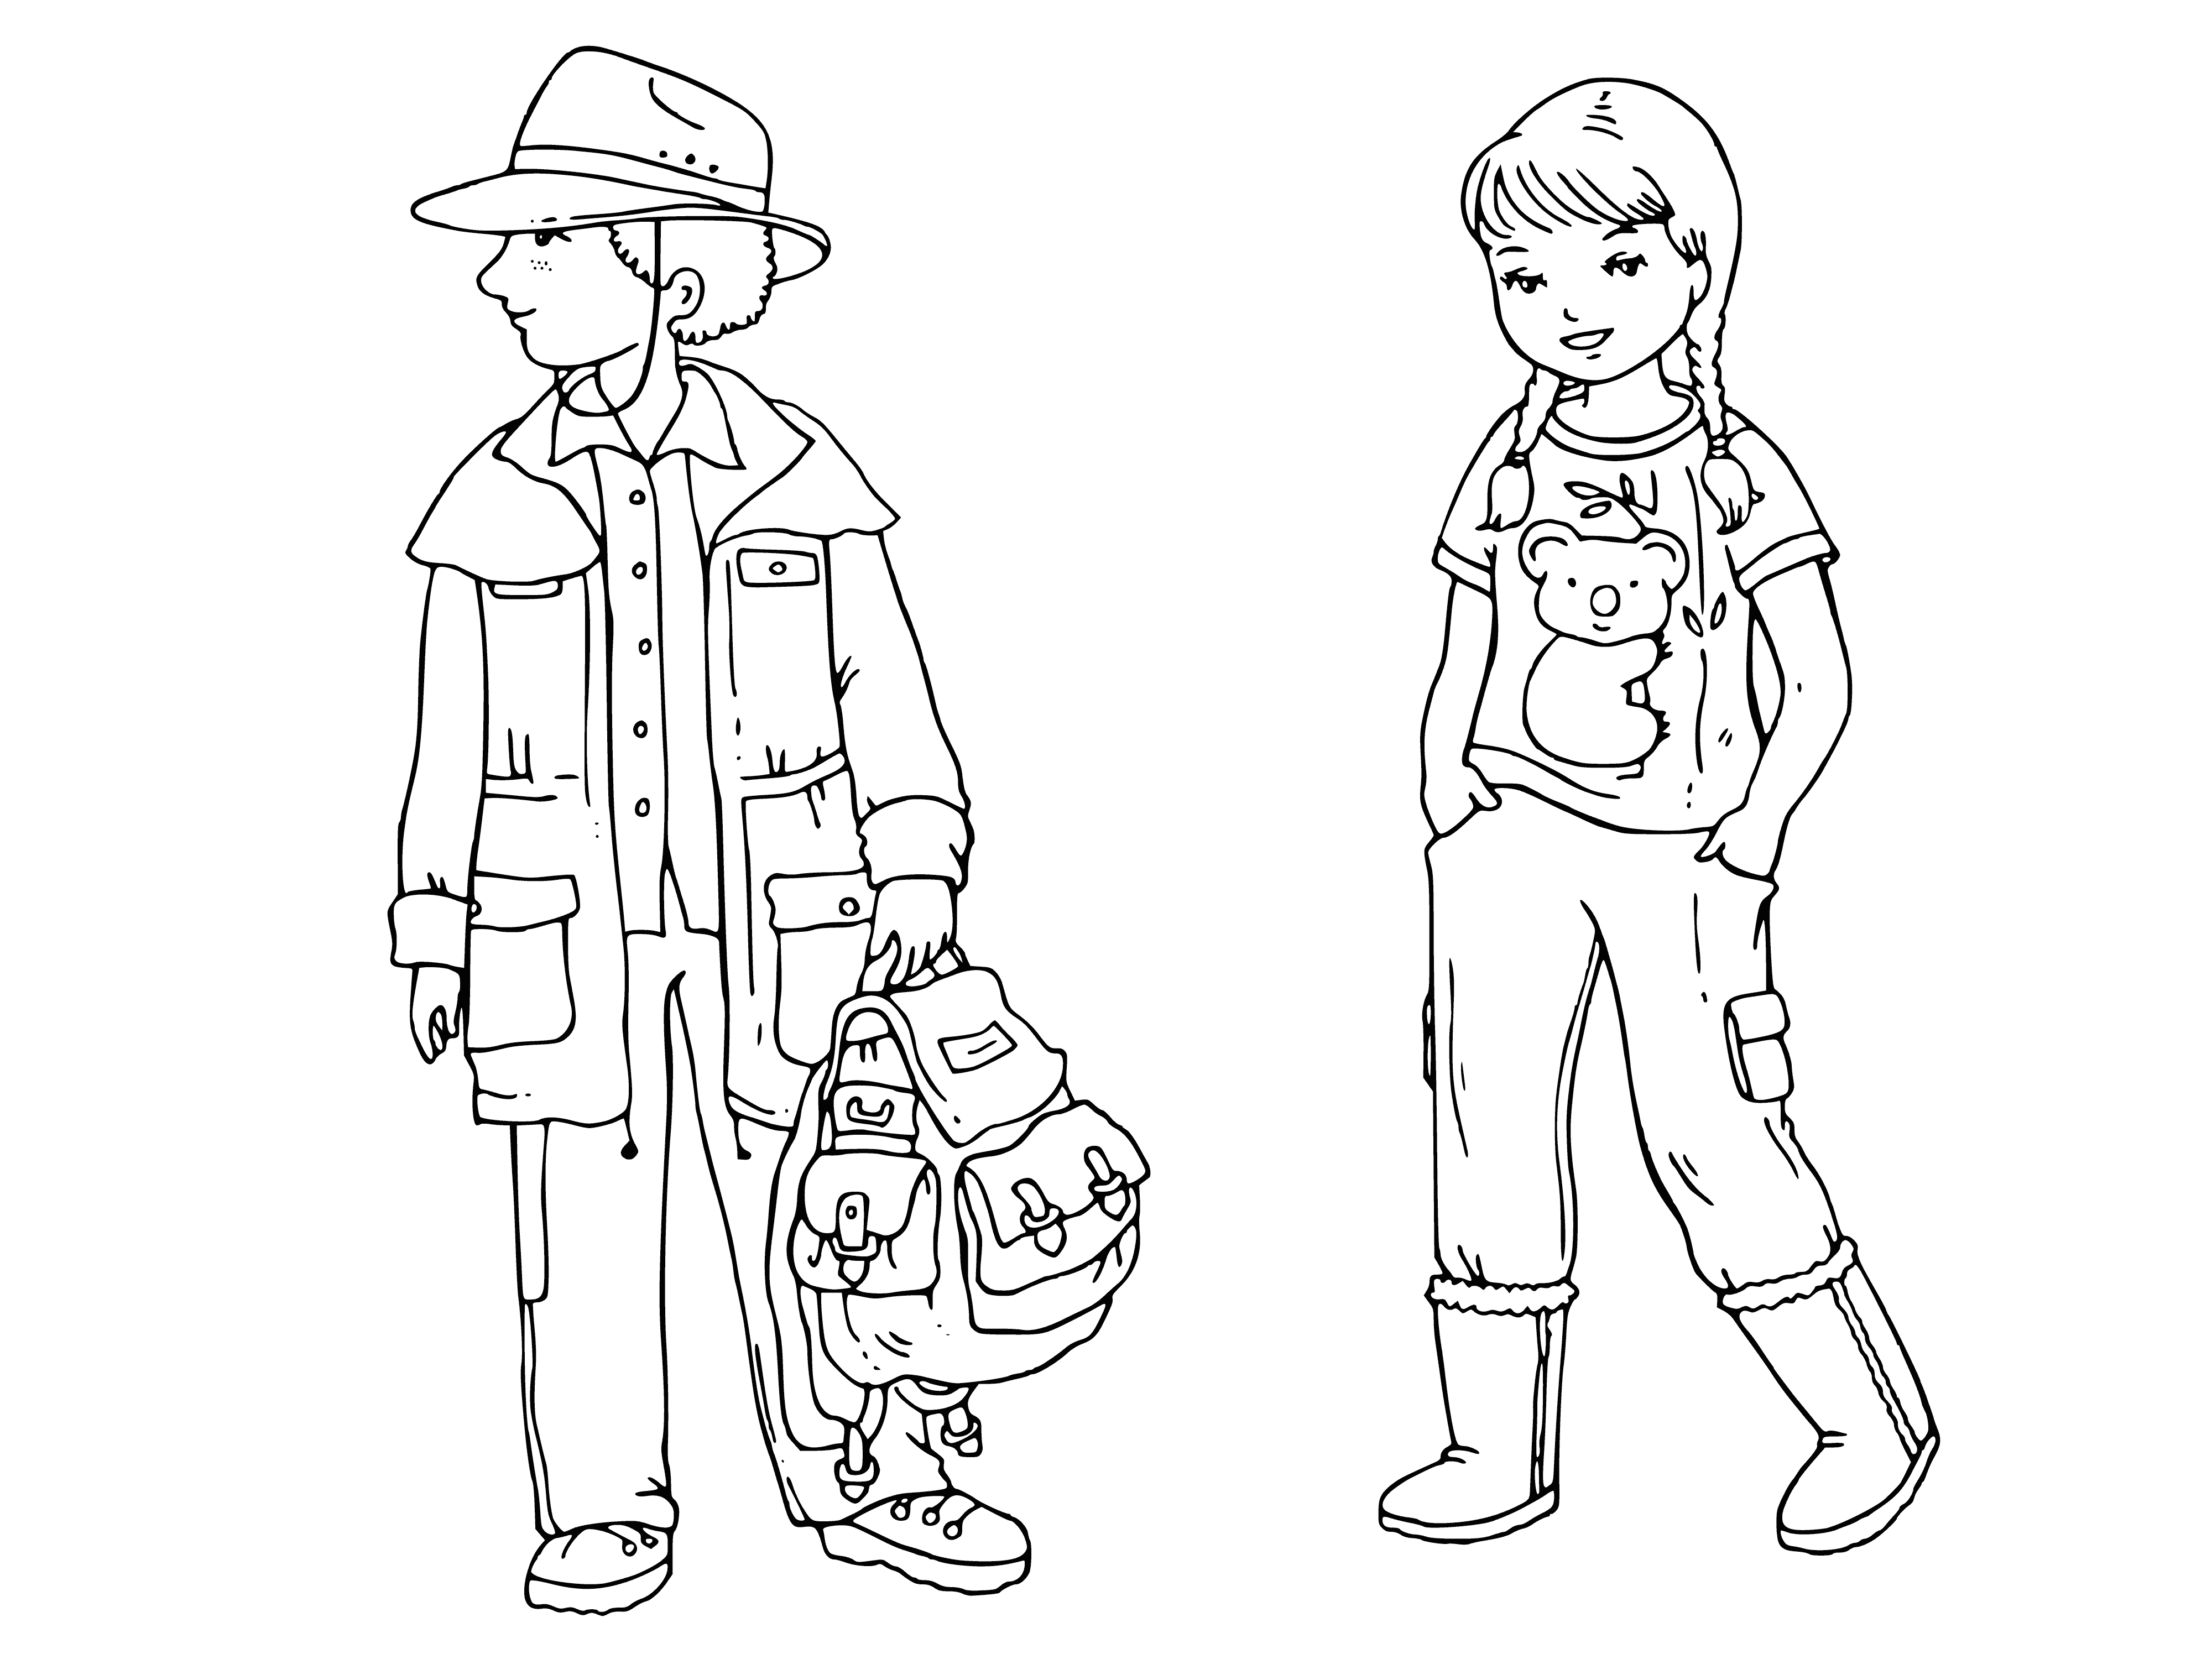 coloring page: Australian children in national costumes: girl in red dress/white apron, bonnet; boy in white shirt/black pants, black hat, knife in belt. #culture